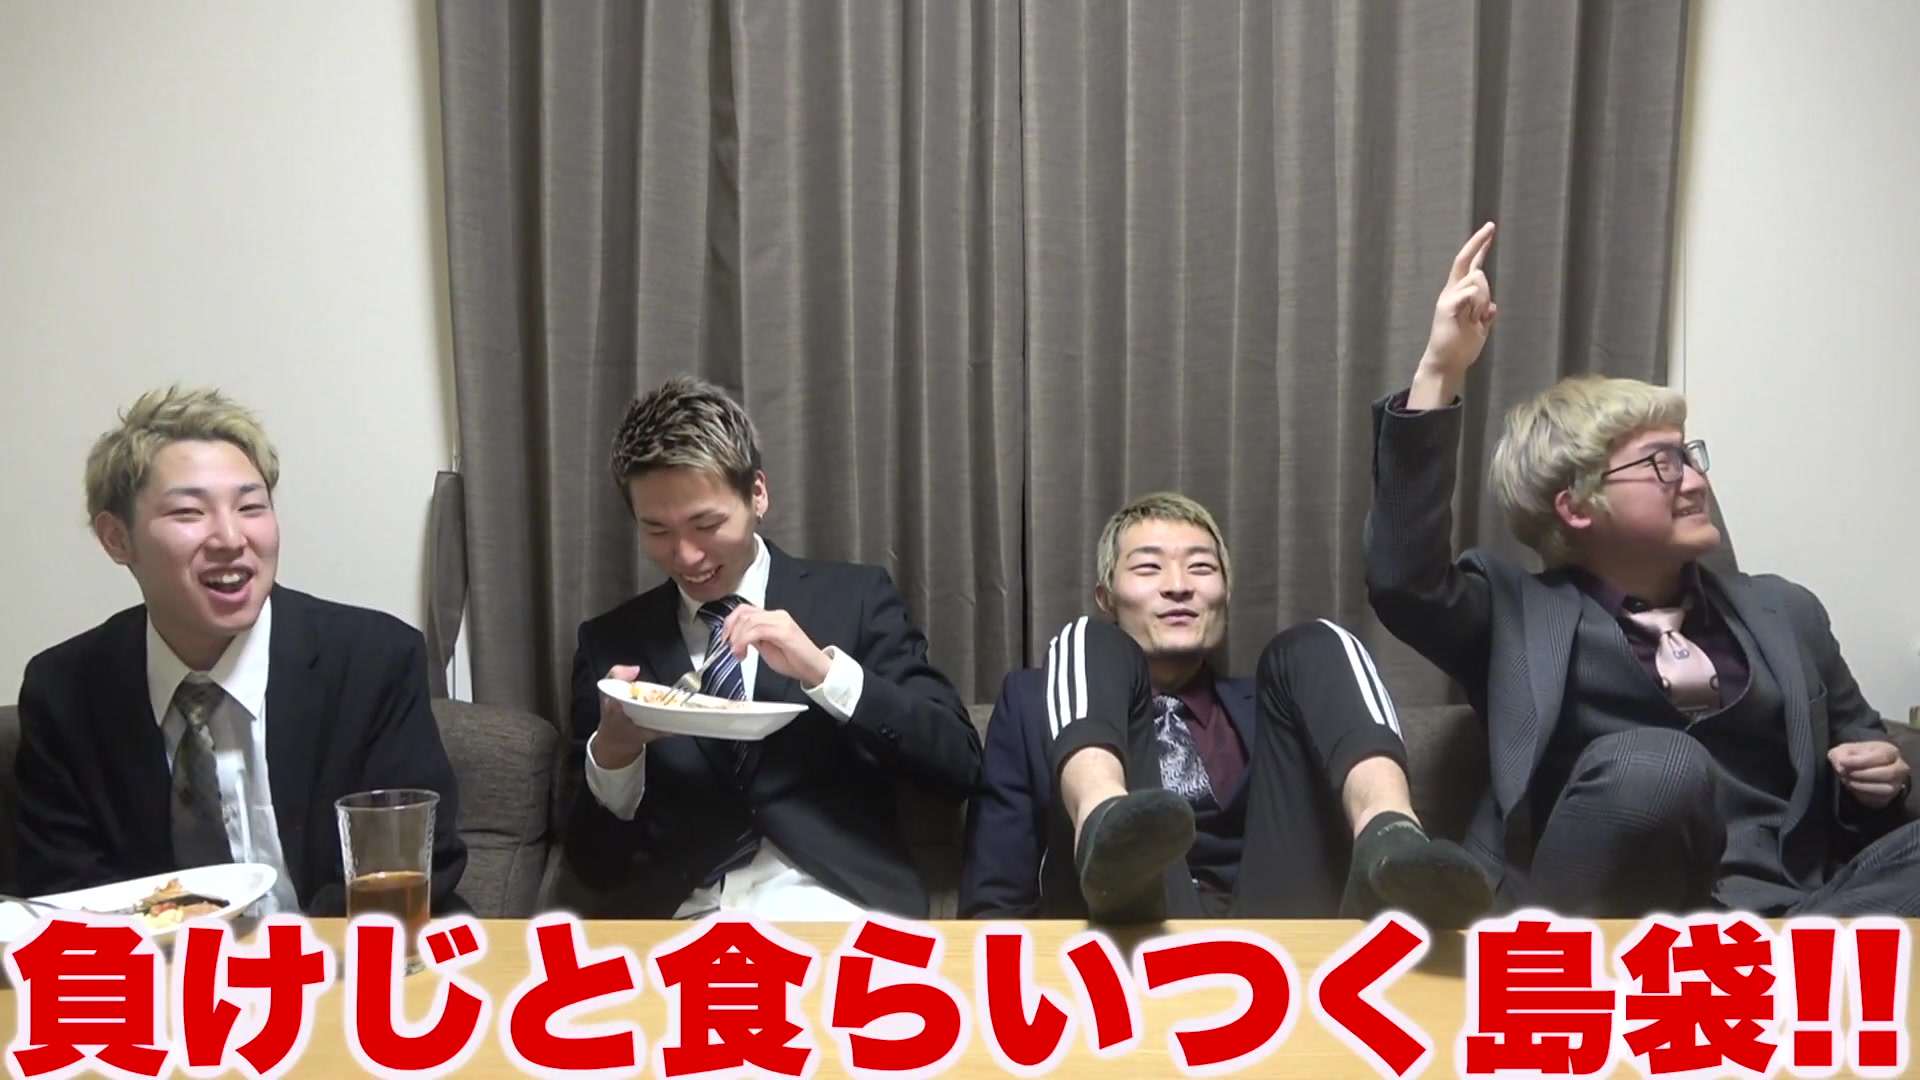 Japanese YouTubers fart for their food